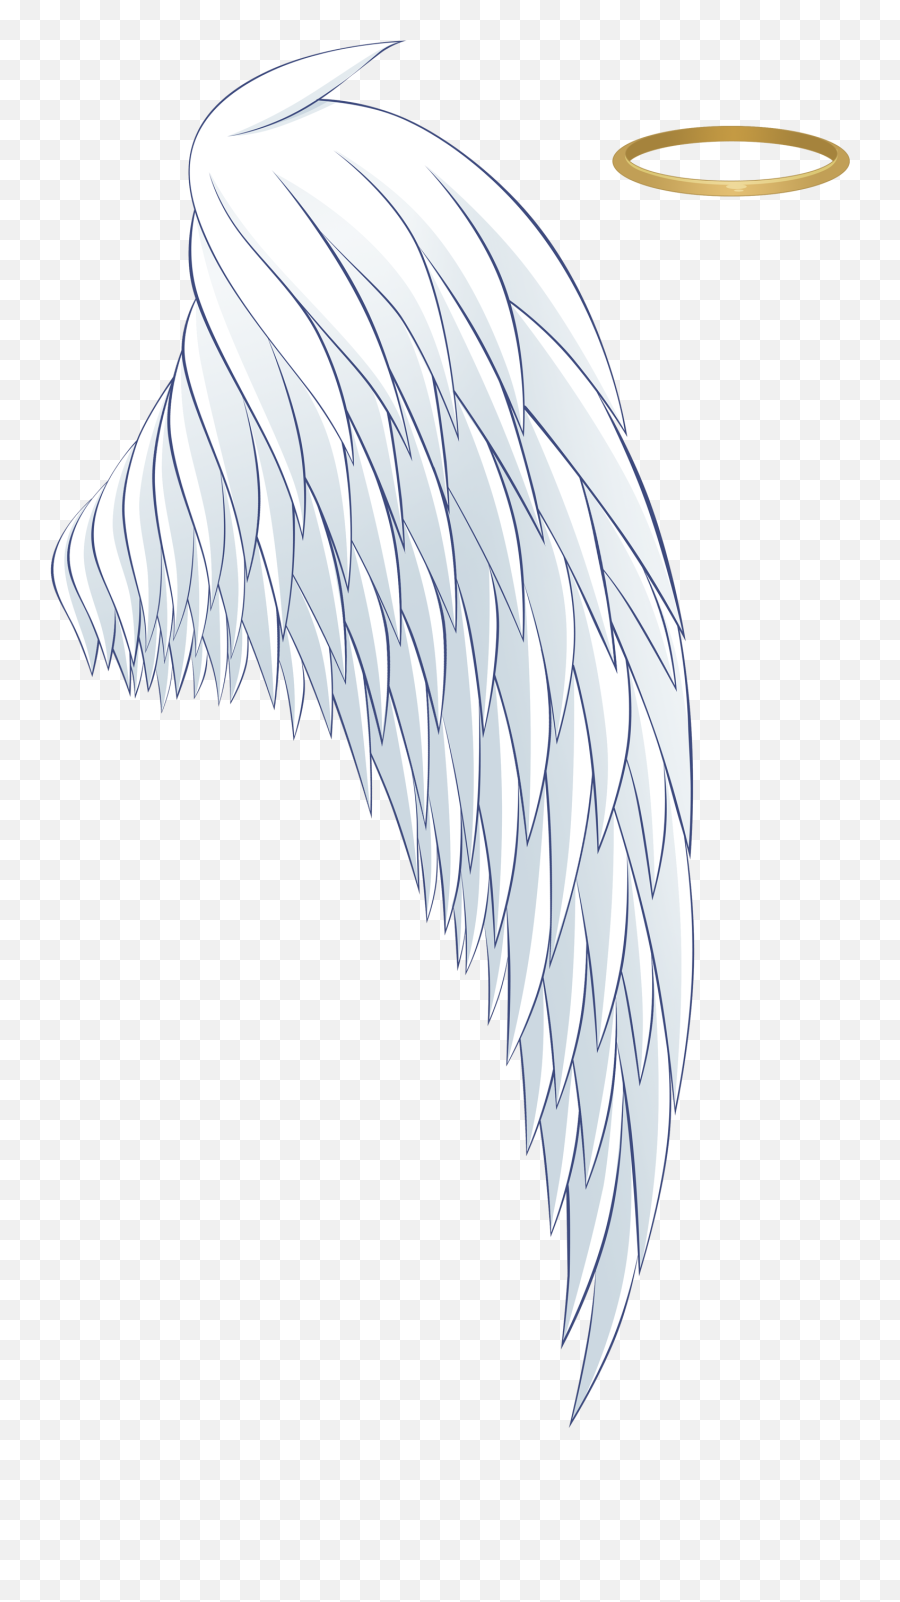 Angel Wing Aureola White Wings Halo Hq - Halo Angel Wings Png,Angel Halo Transparent Background